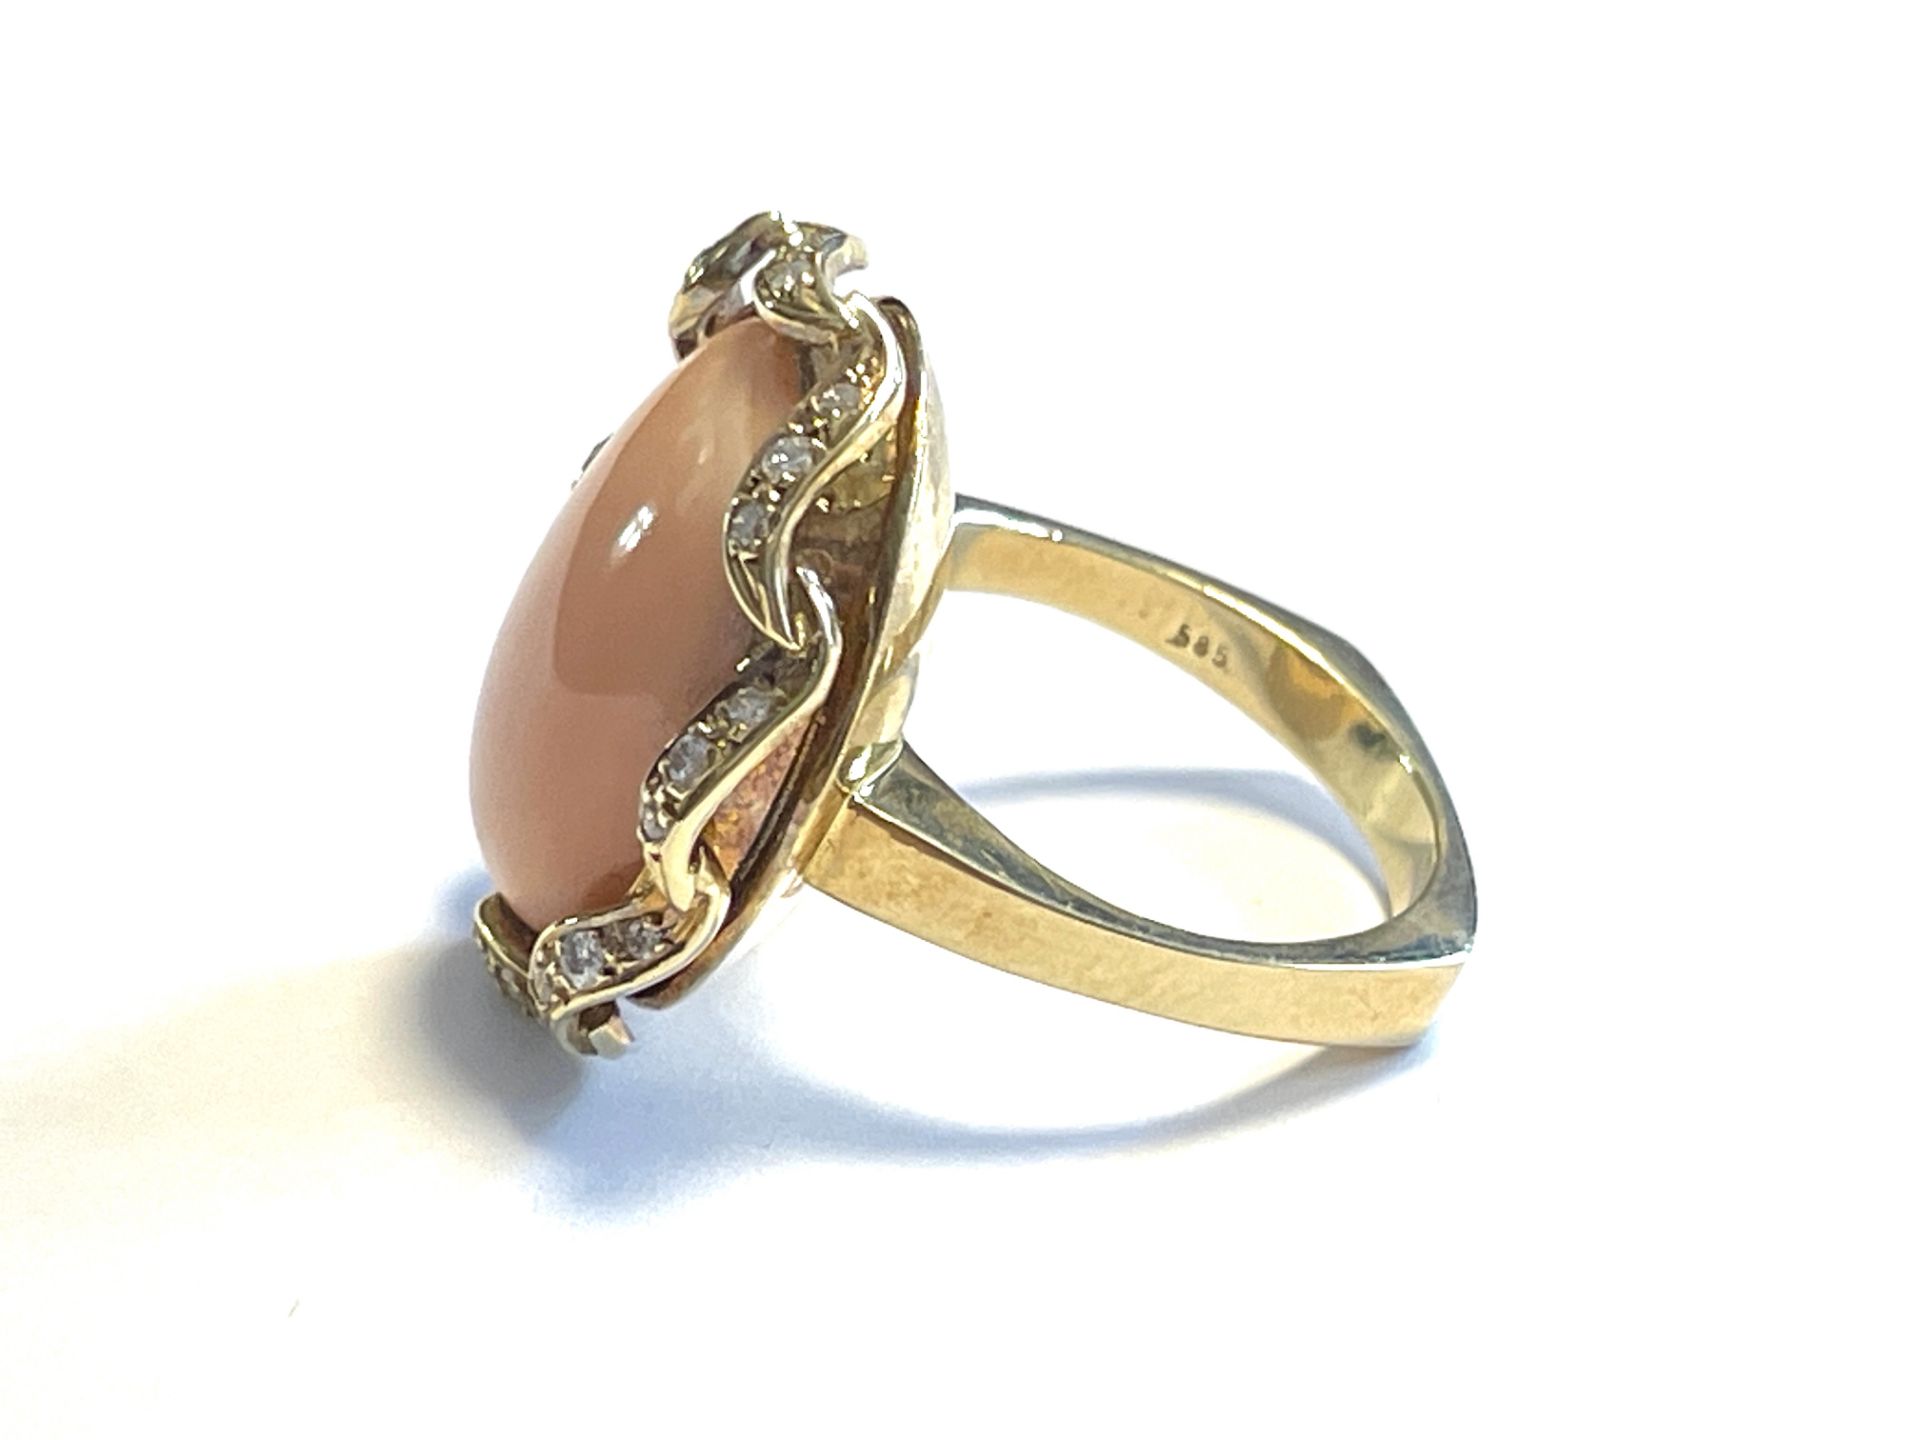 Coral ring with diamonds - Image 9 of 11